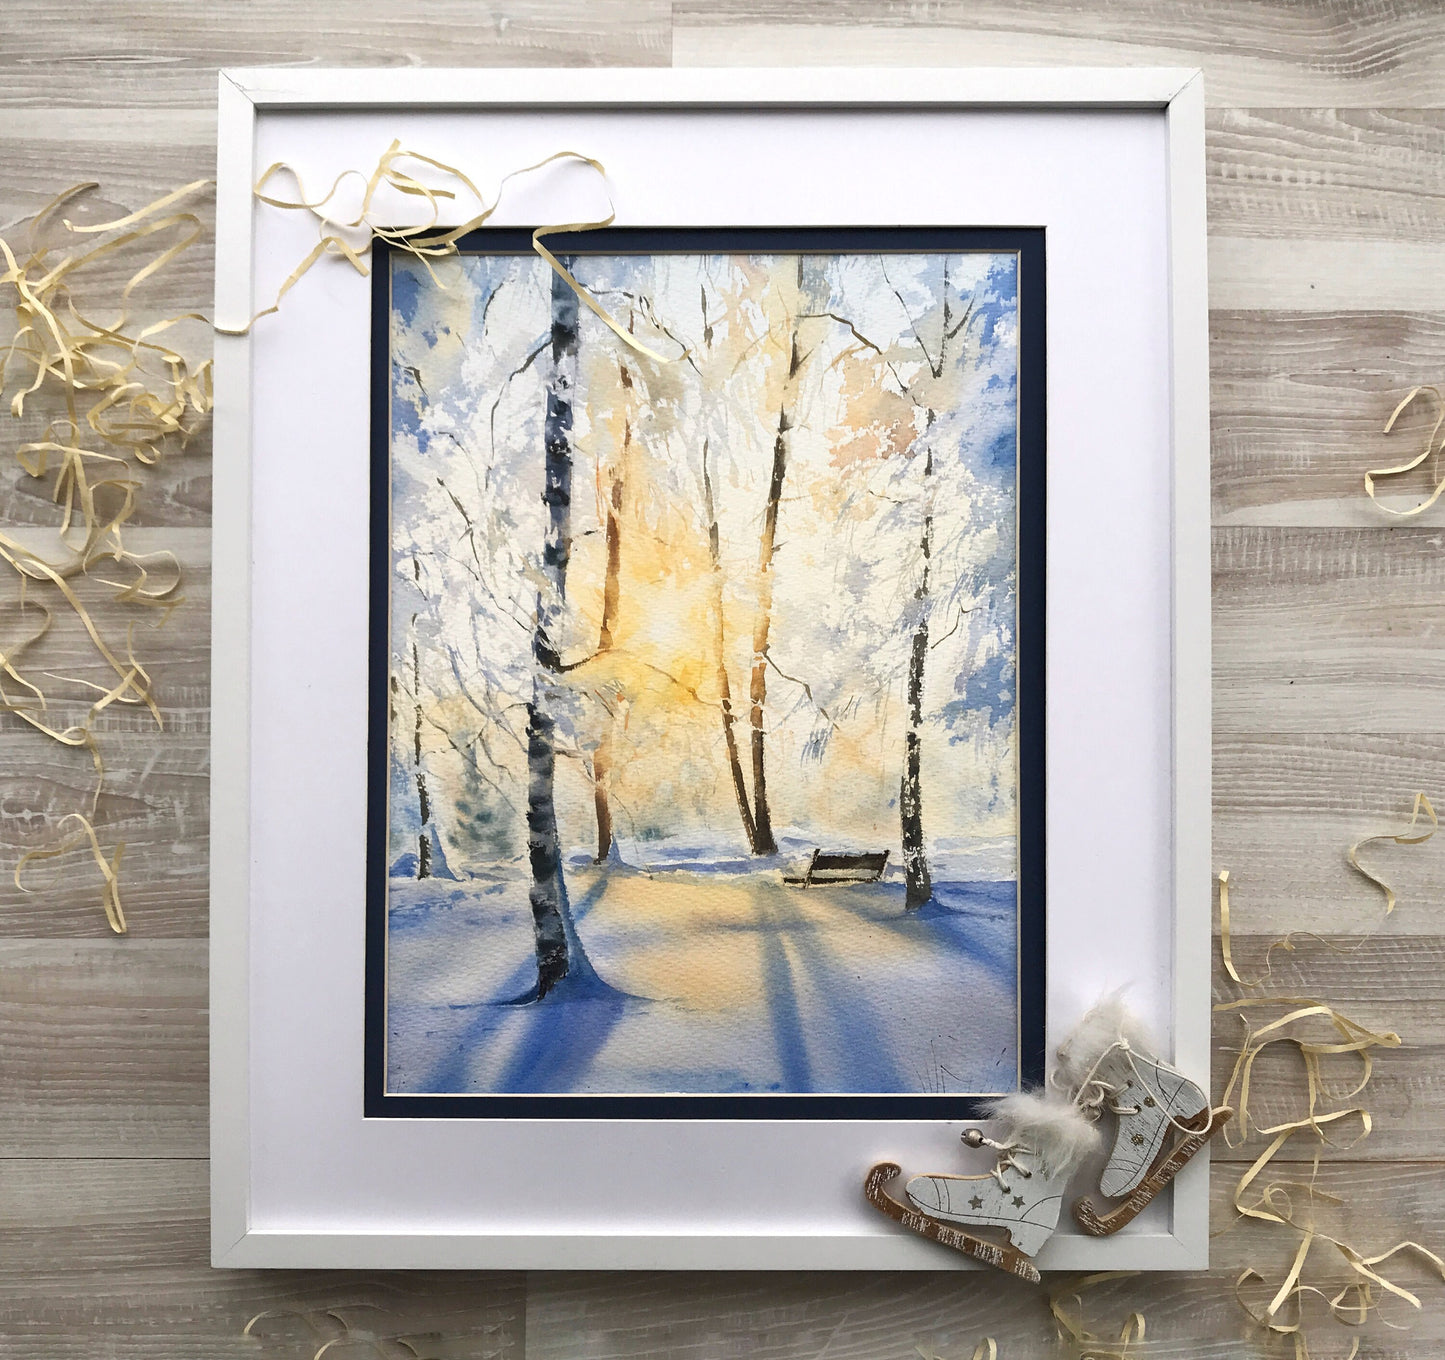 Winter Forest Painting Original, White Snow Wall Decor, Snowy Trees Art, Watercolor Sunny Landscape, Morning